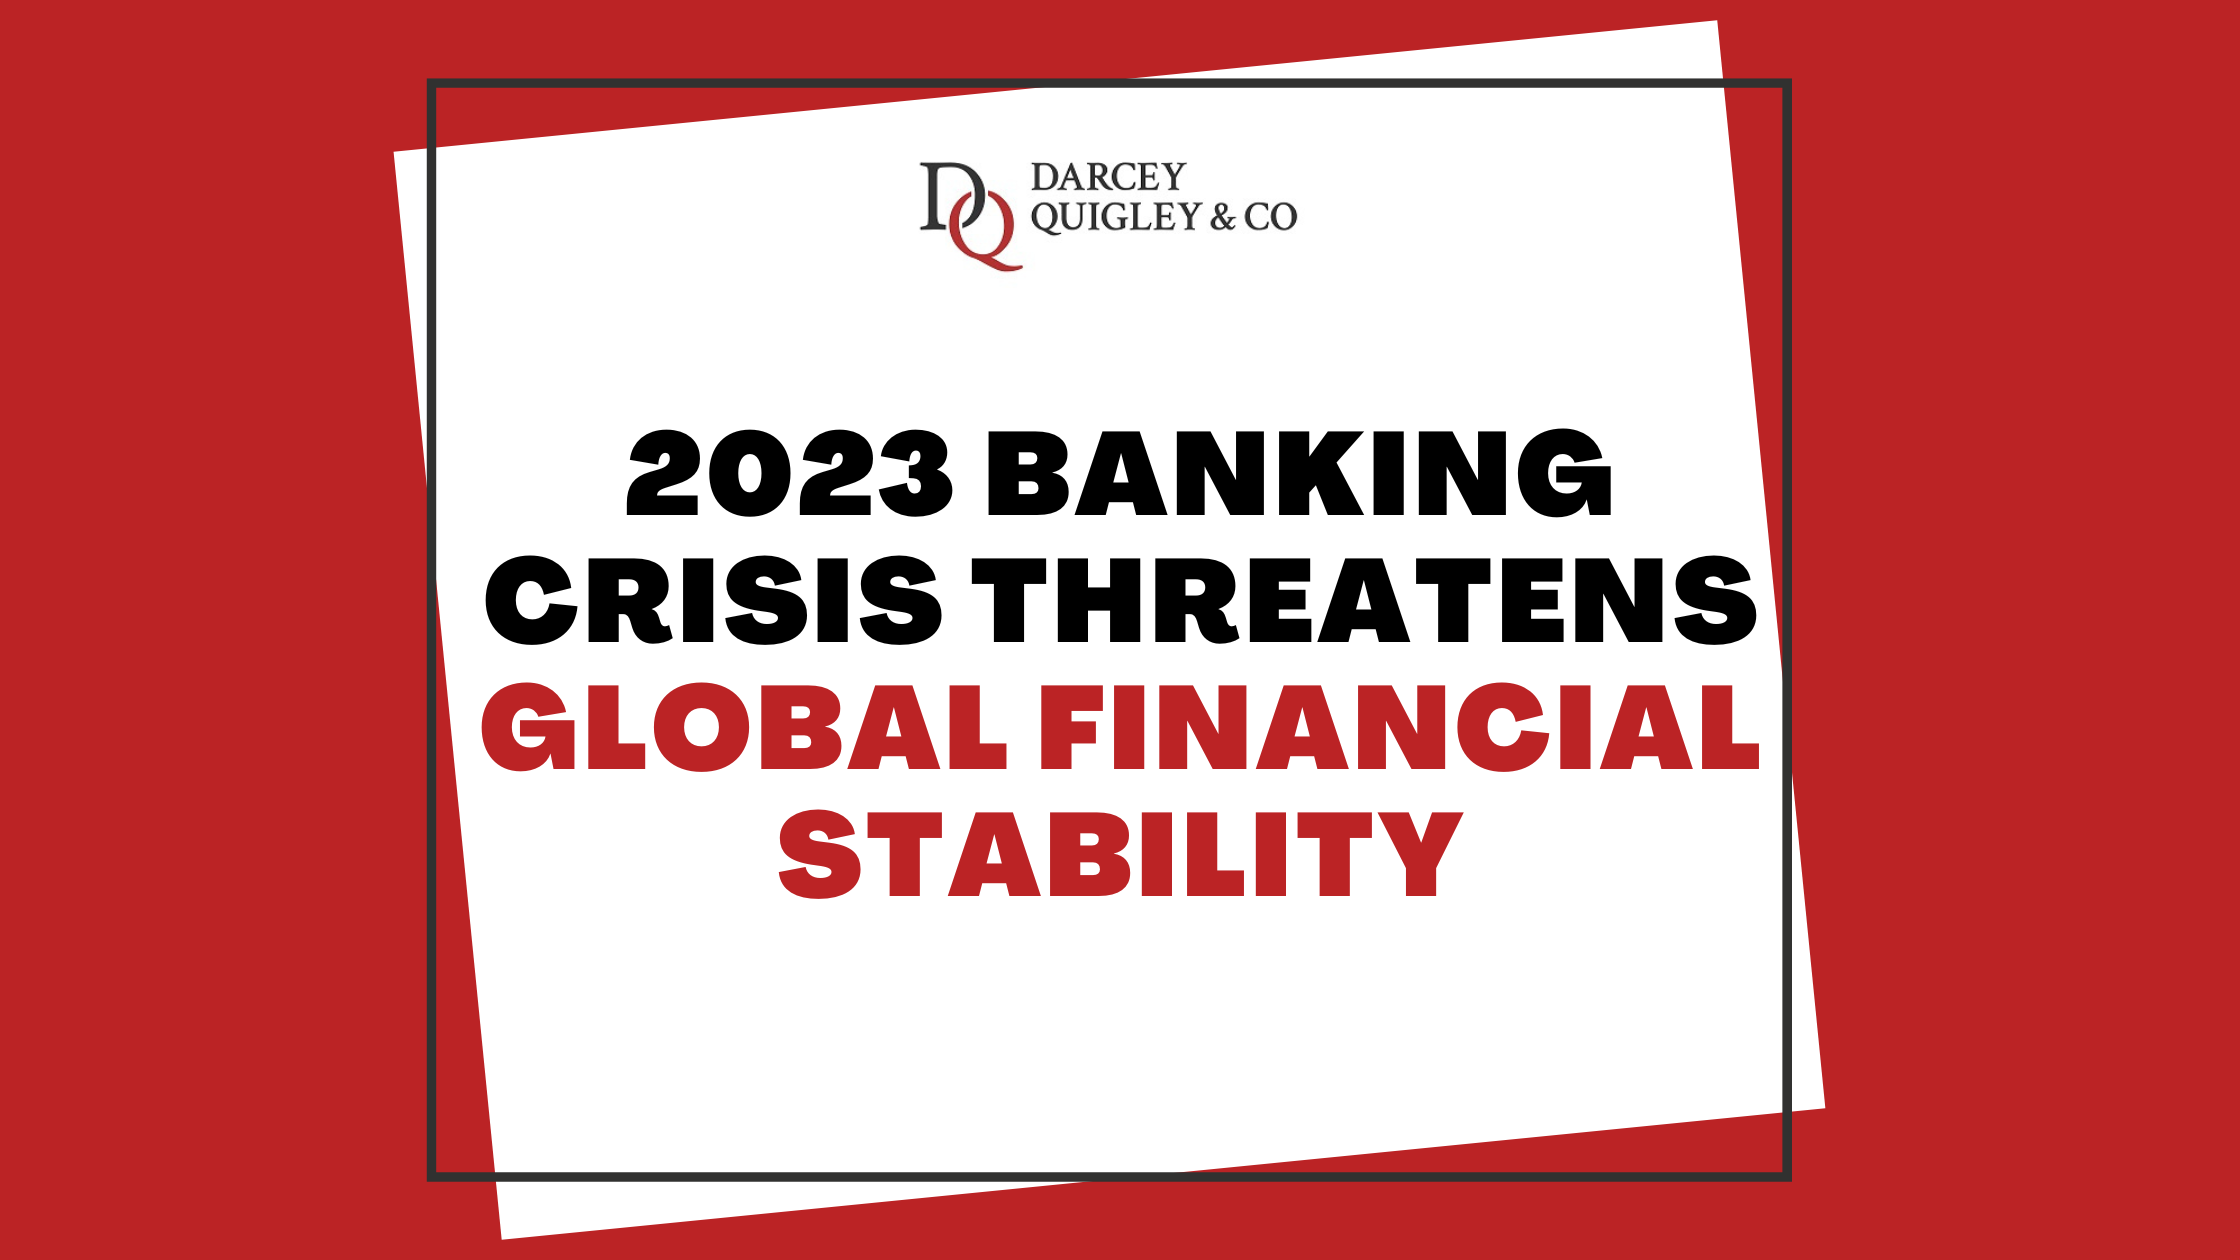 2023 Banking Crisis Threatens Global Financial Stability